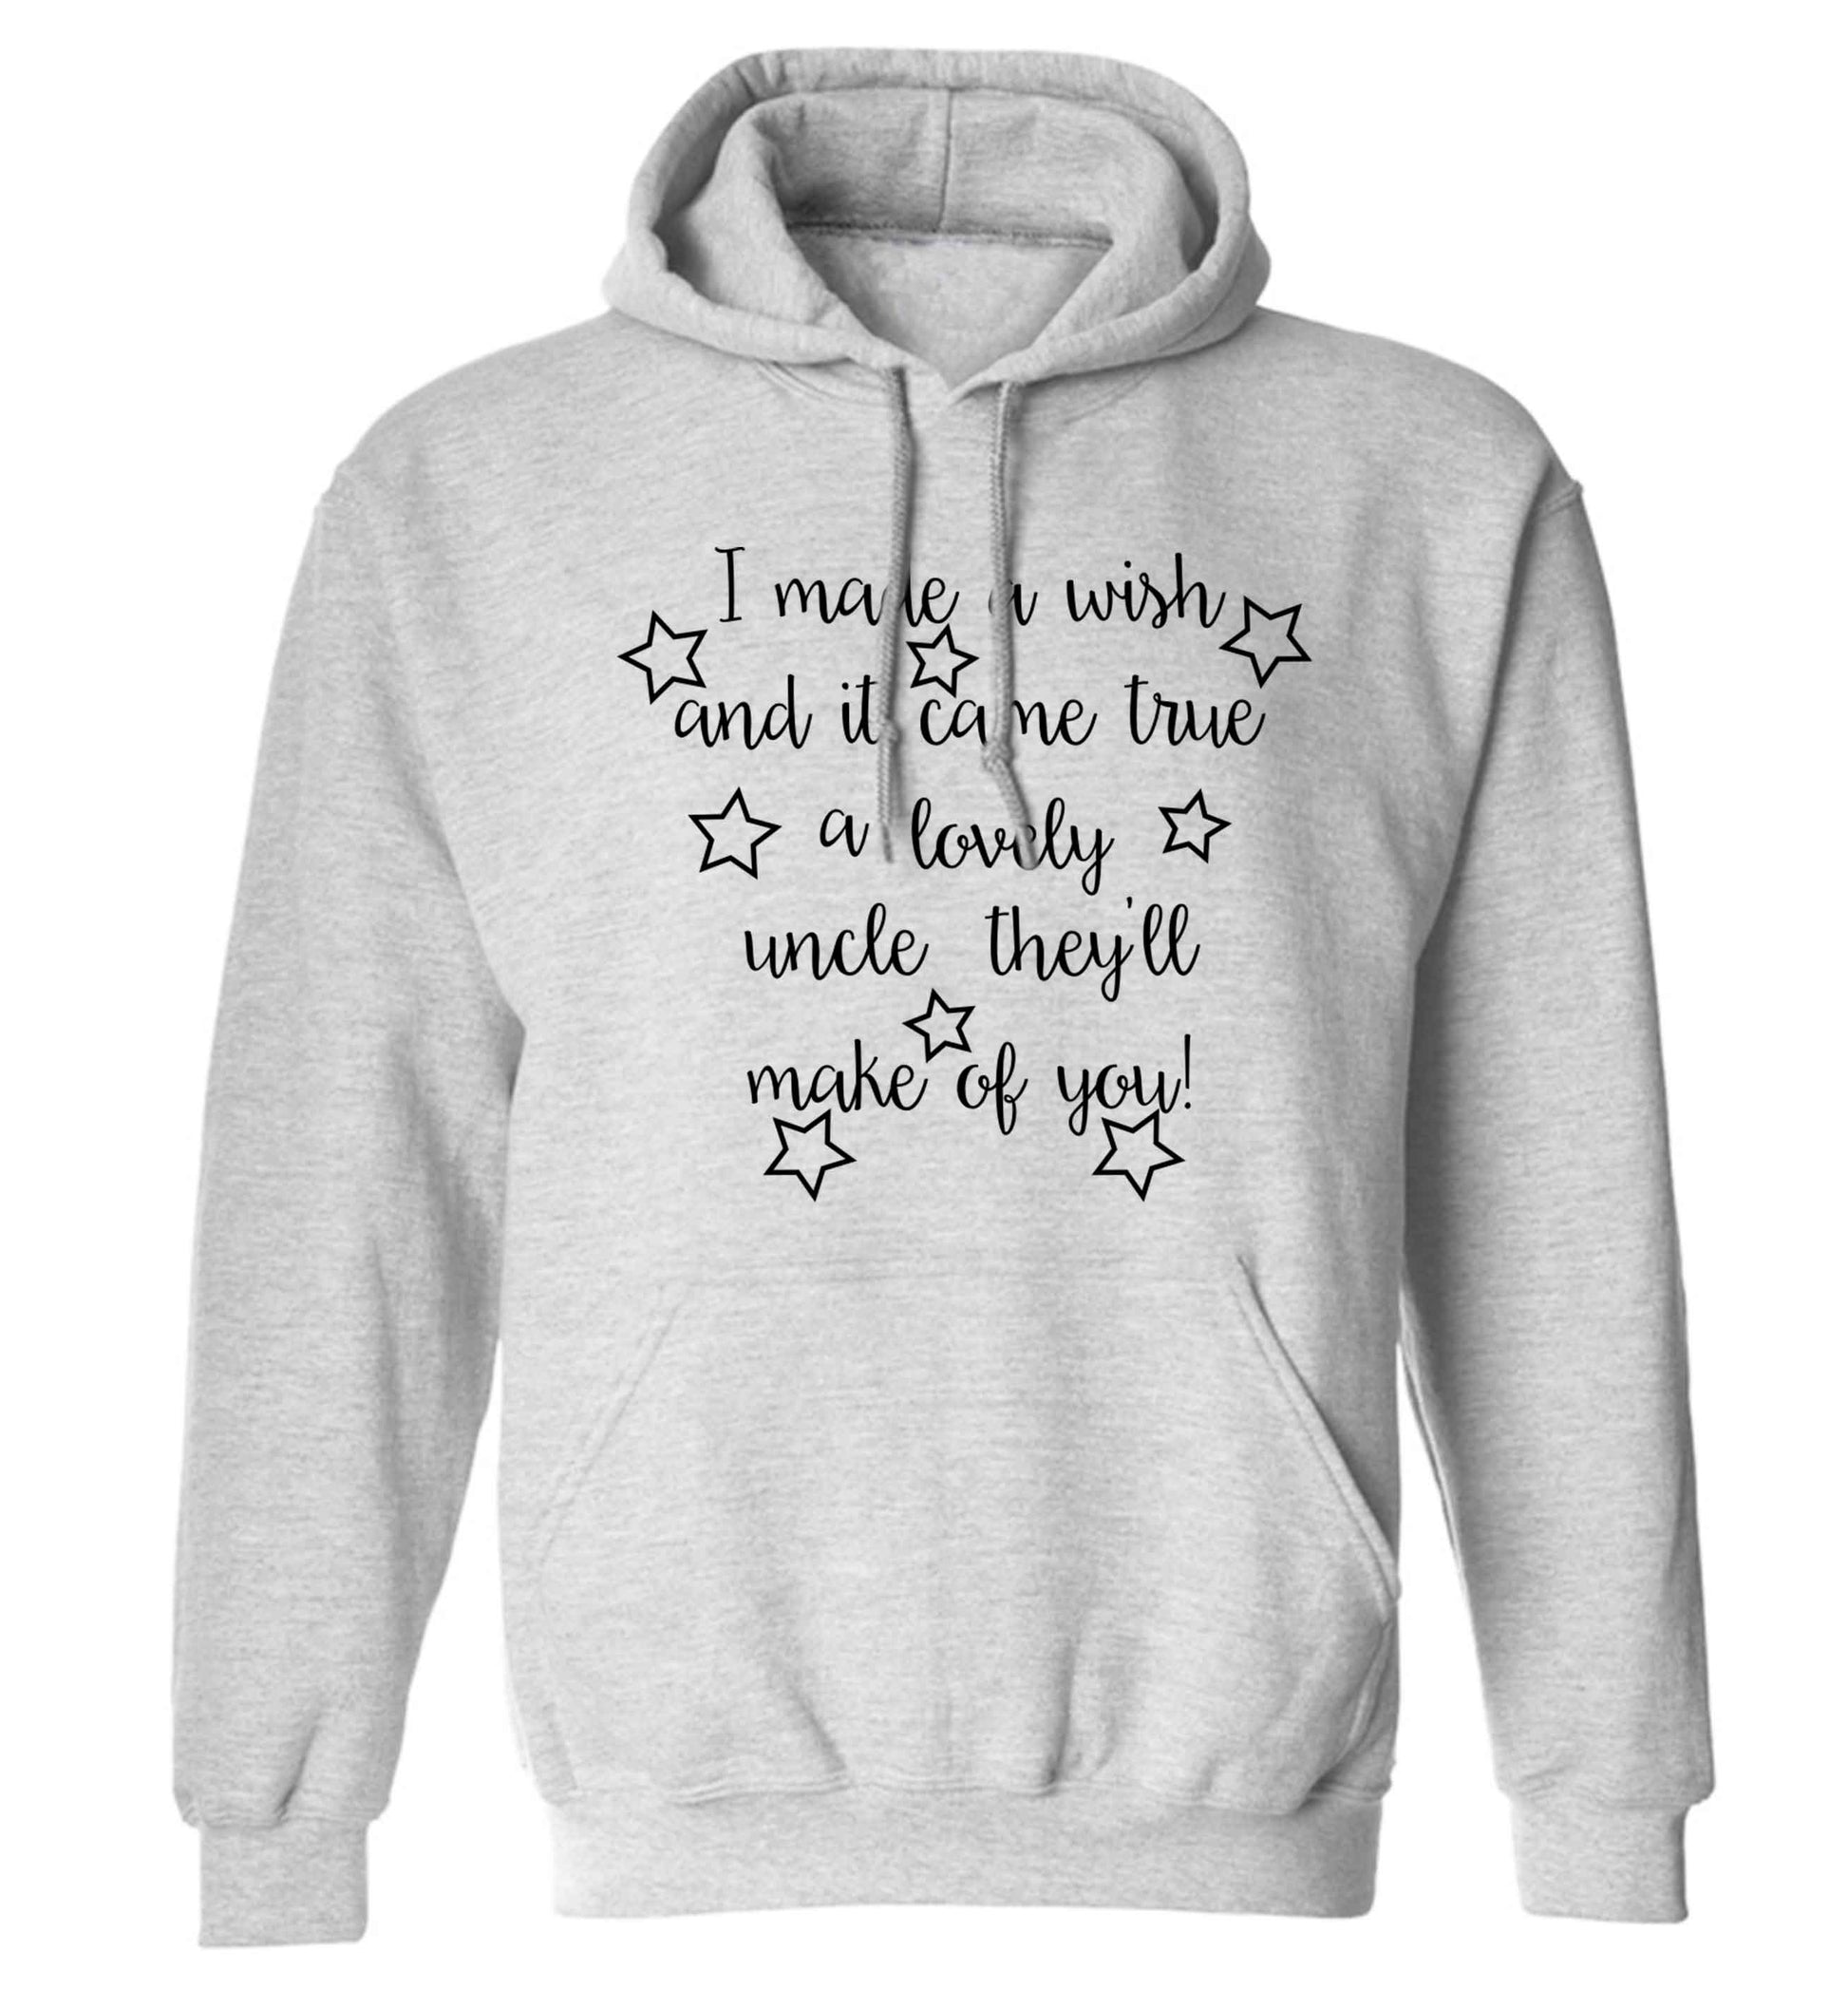 I made a wish and it came true a lovely uncle they'll make of you! adults unisex grey hoodie 2XL